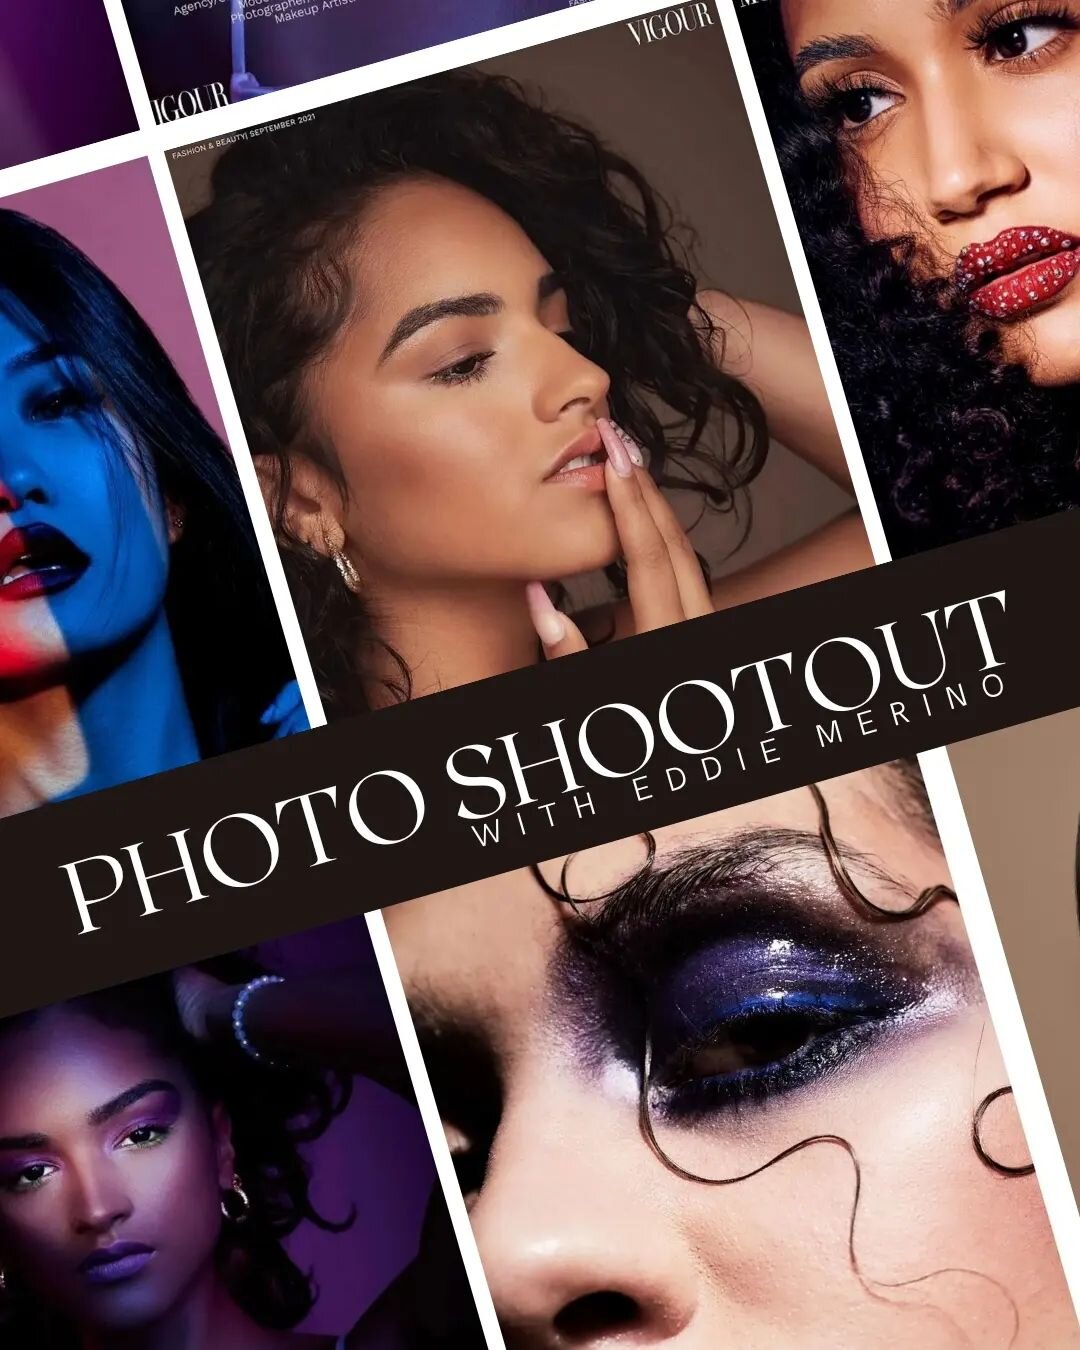 LET'S SHOOT!

We're excited to announce an exclusive photo shoot event with the talented photographer Eddie Merino. Models arrive camera-ready with your hair and makeup done to perfection. Together, we'll capture stunning editorial beauty and fashion